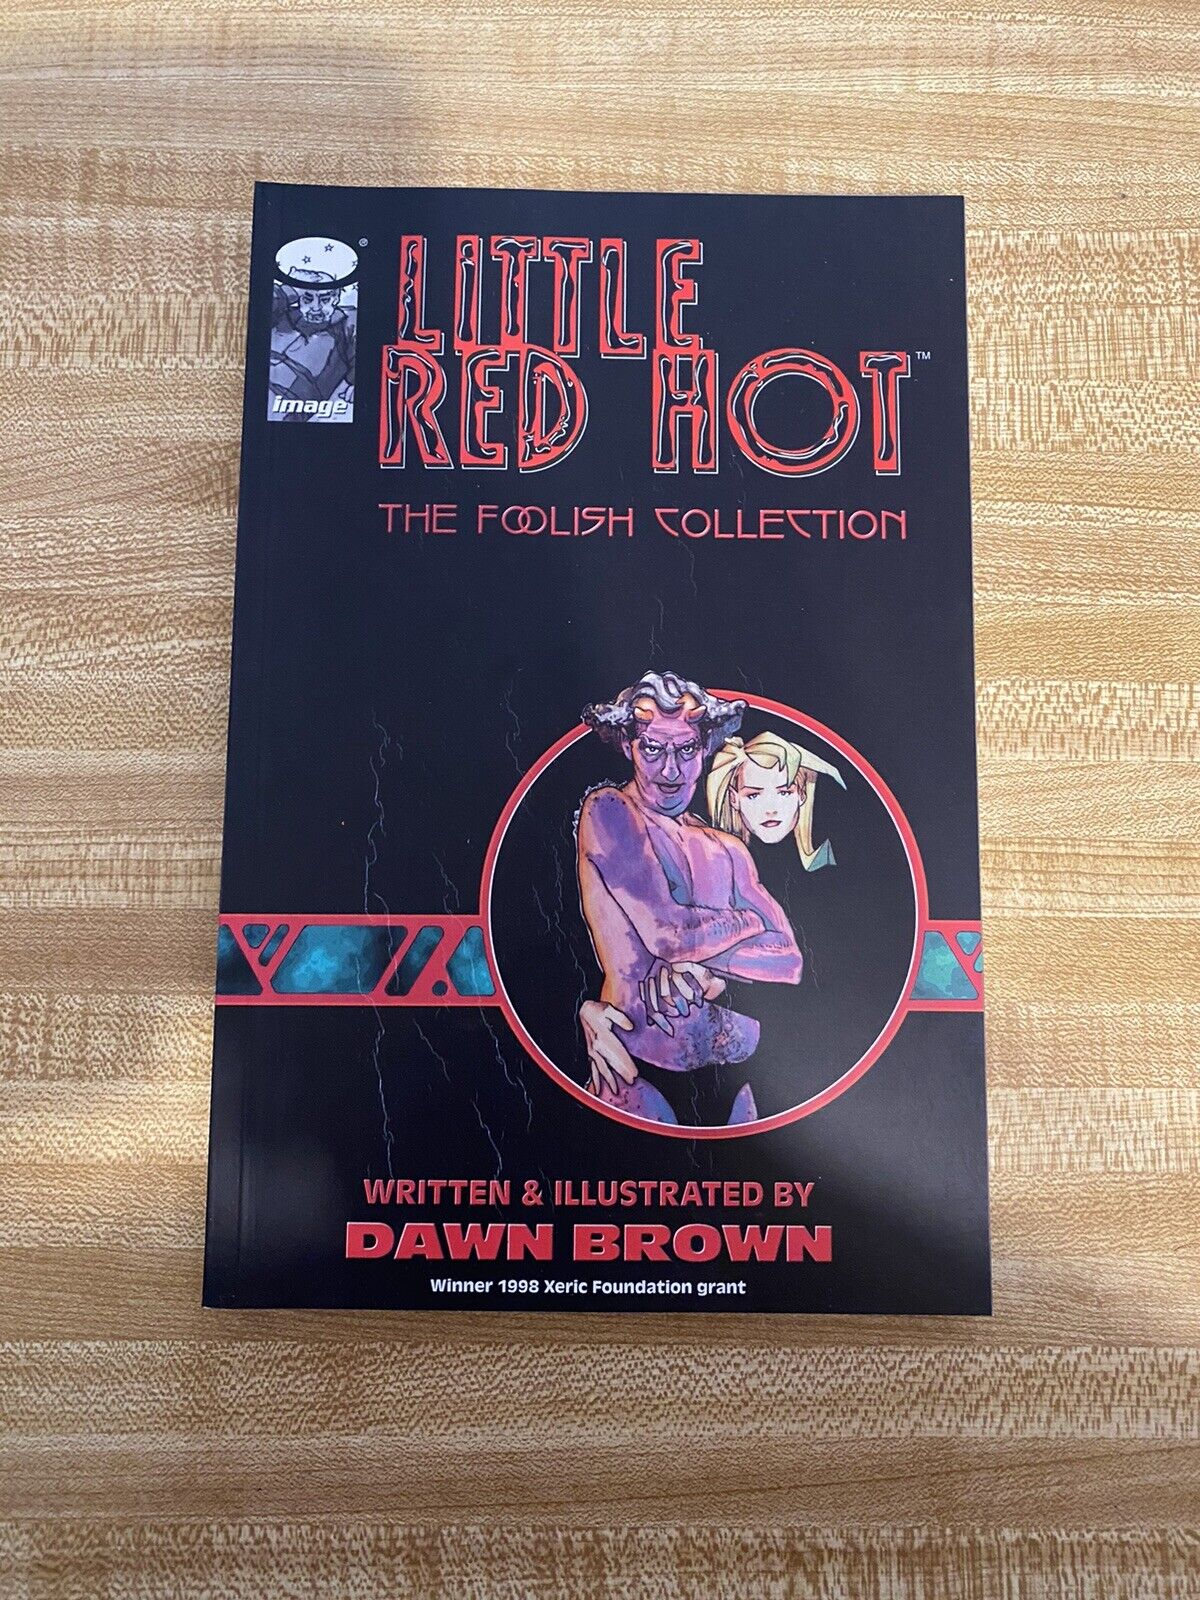 LITTLE RED HOT: THE FOOLISH COLLECTION